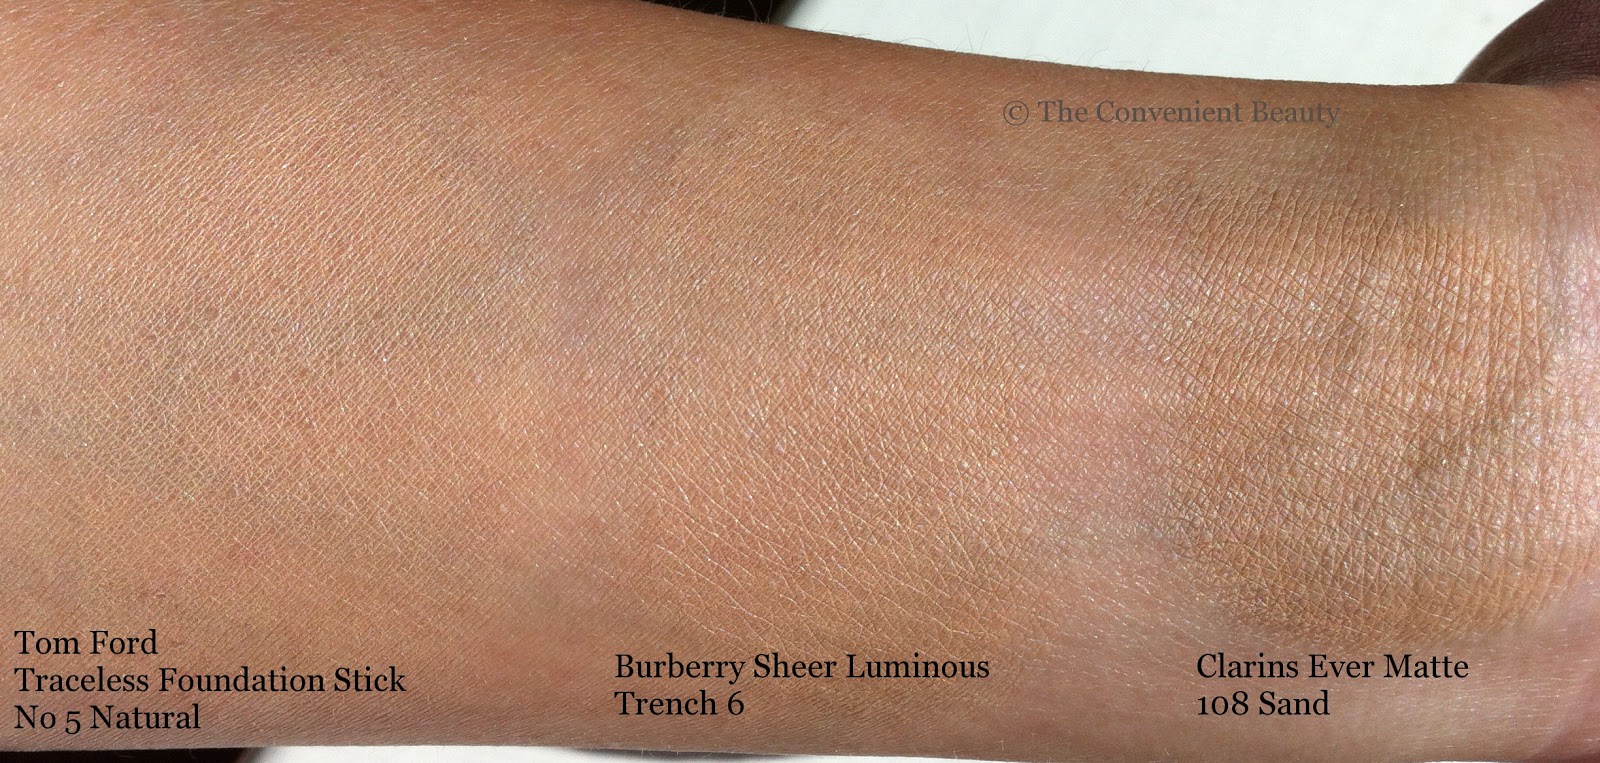 The Convenient Beauty: Review: Tom Ford Traceless Foundation Stick 05  Natural